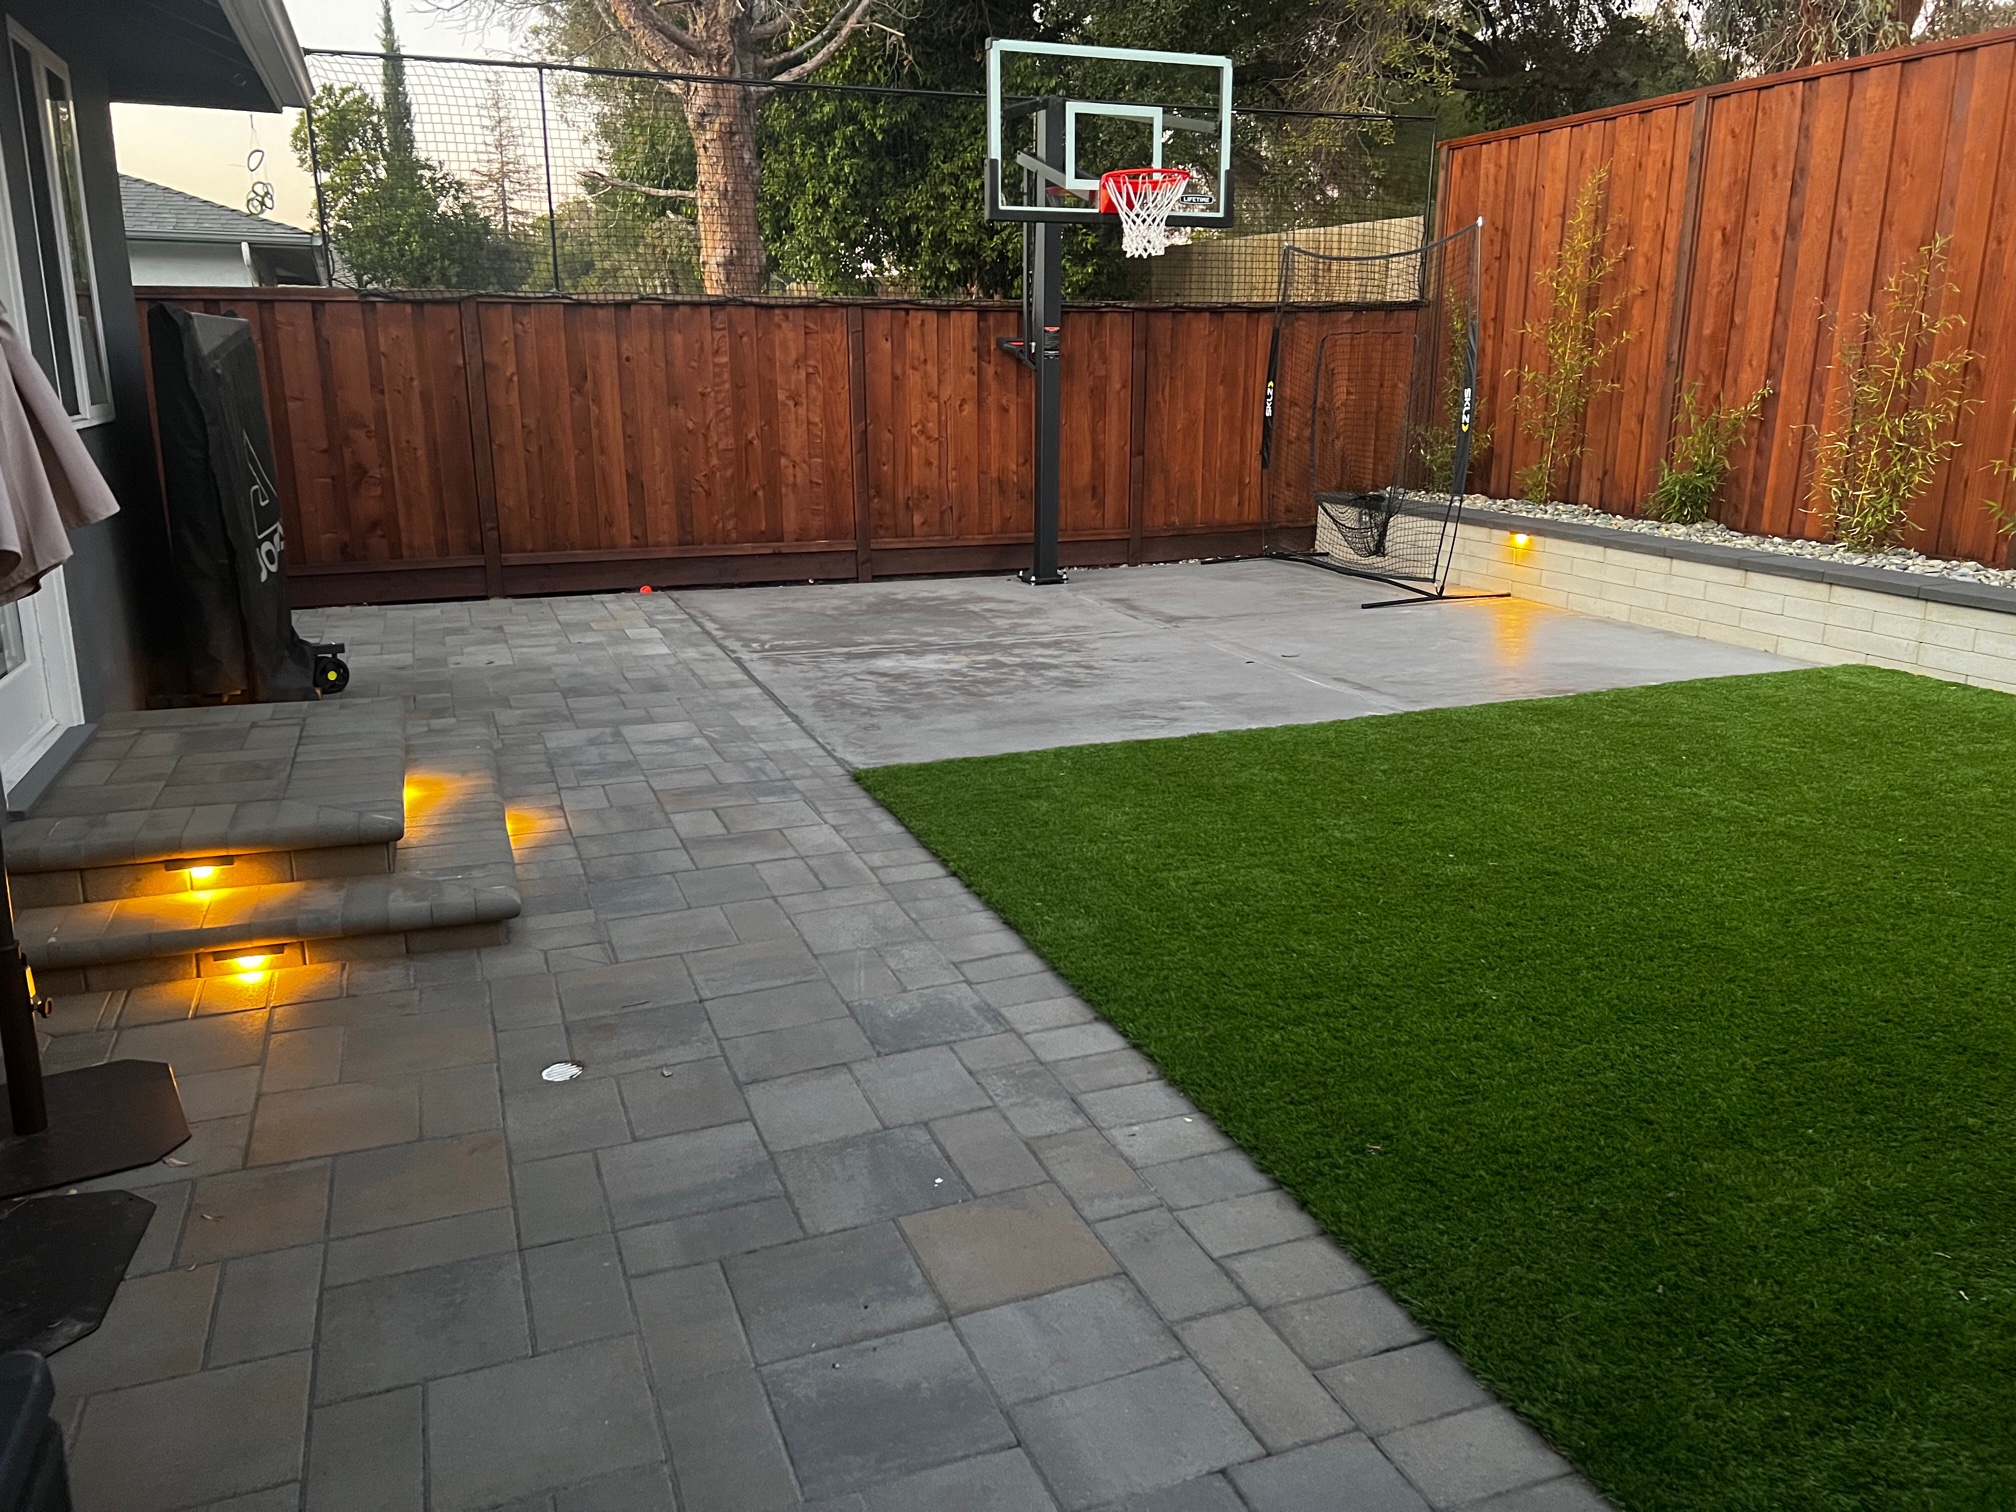 Concord project – Artificial Turf